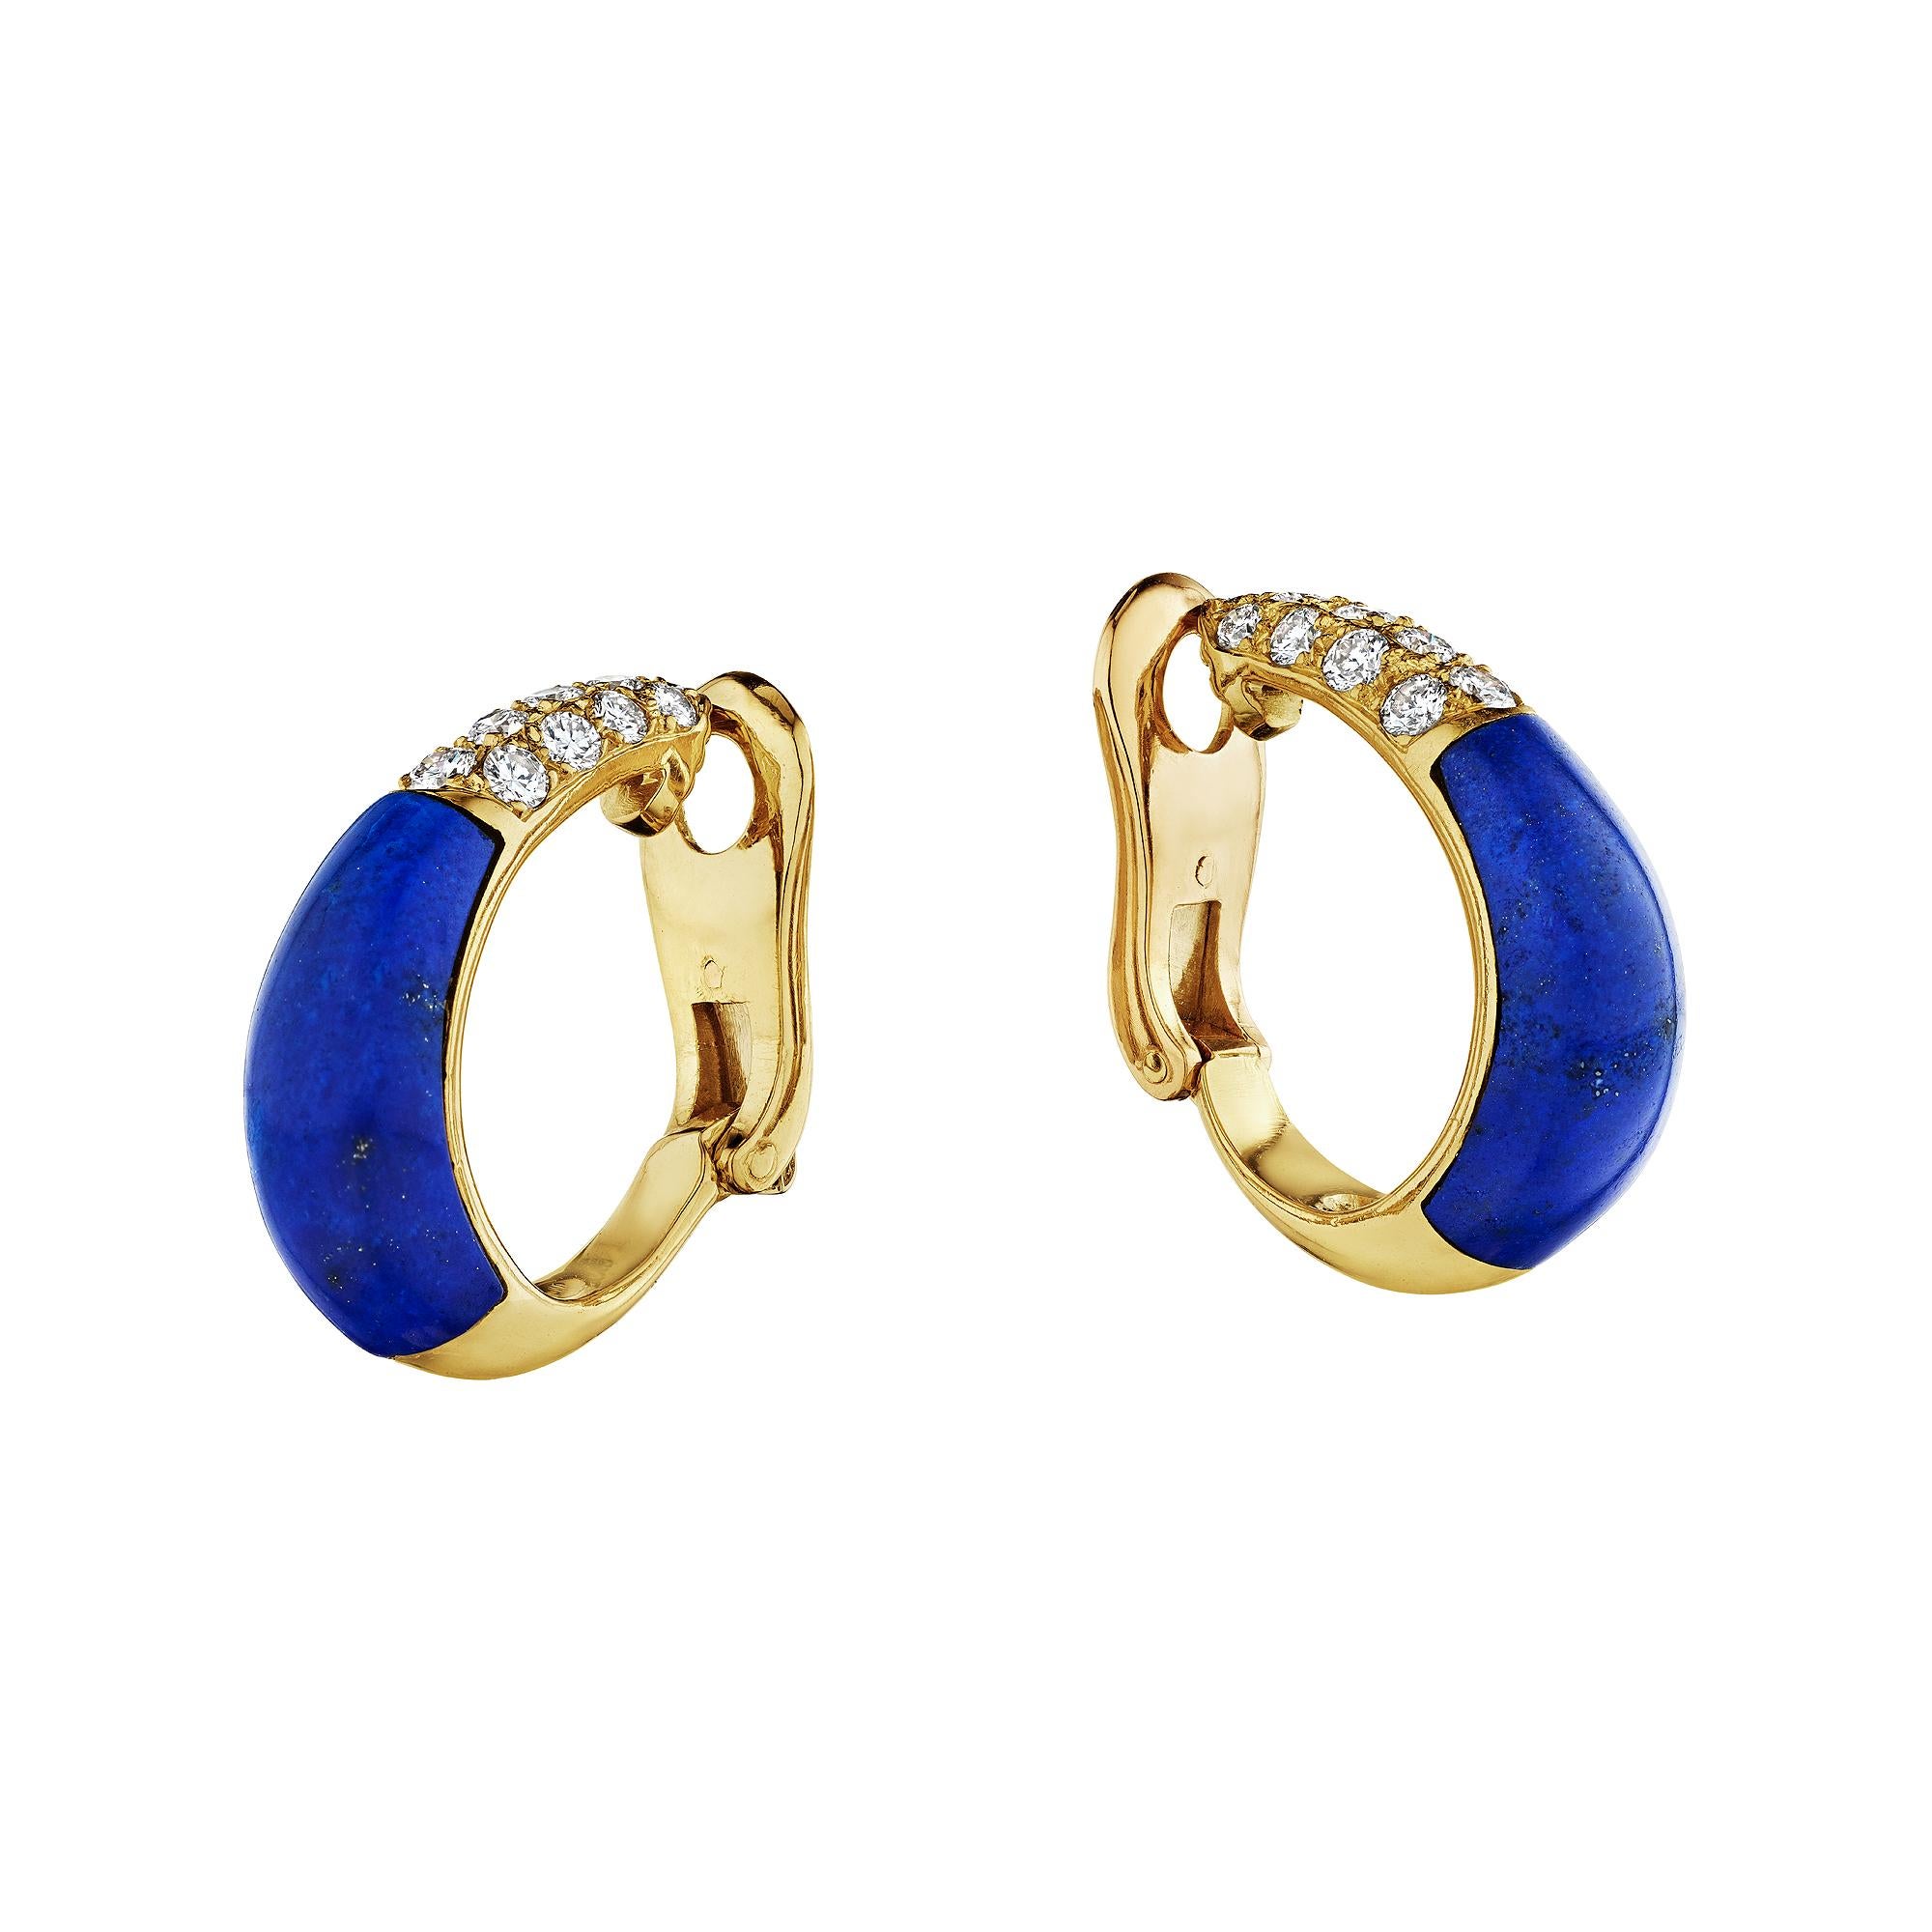 Filled with sophisticated energy these Cartier Paris modernist diamond, 18 karat yellow gold, and electric blue lapis clip hoop earrings are intoxicating.   Signed Cartier.  Stamped with serial #R8981.  Circa 1980.  Total approximate round cut